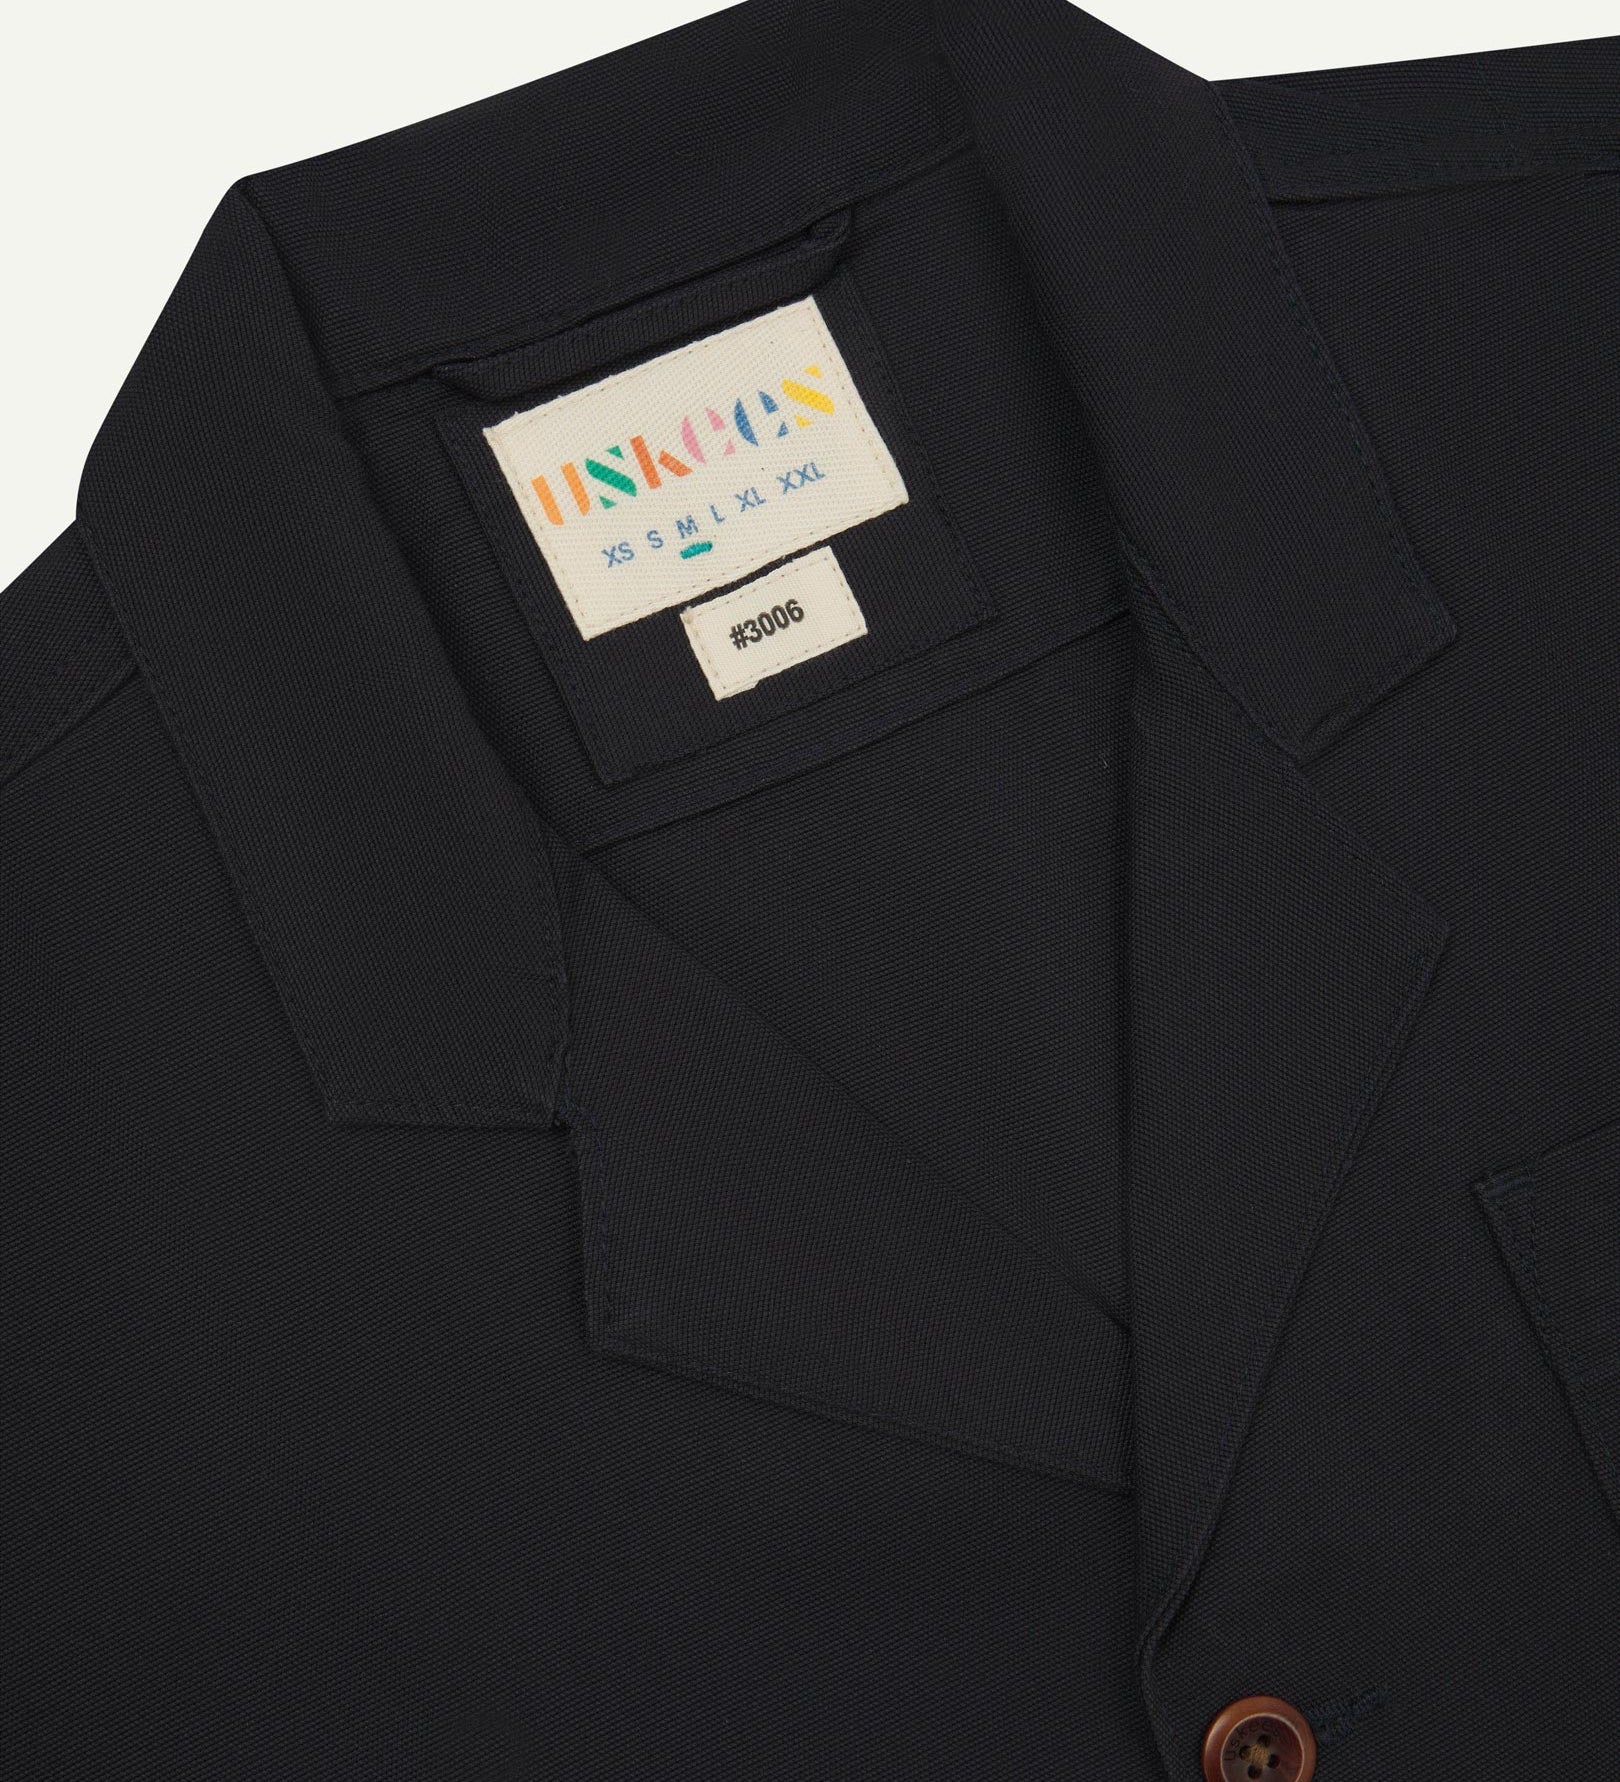 Close-up front view of organic cotton midnight blue blazer showing the collar, lapels and Uskees brand label.